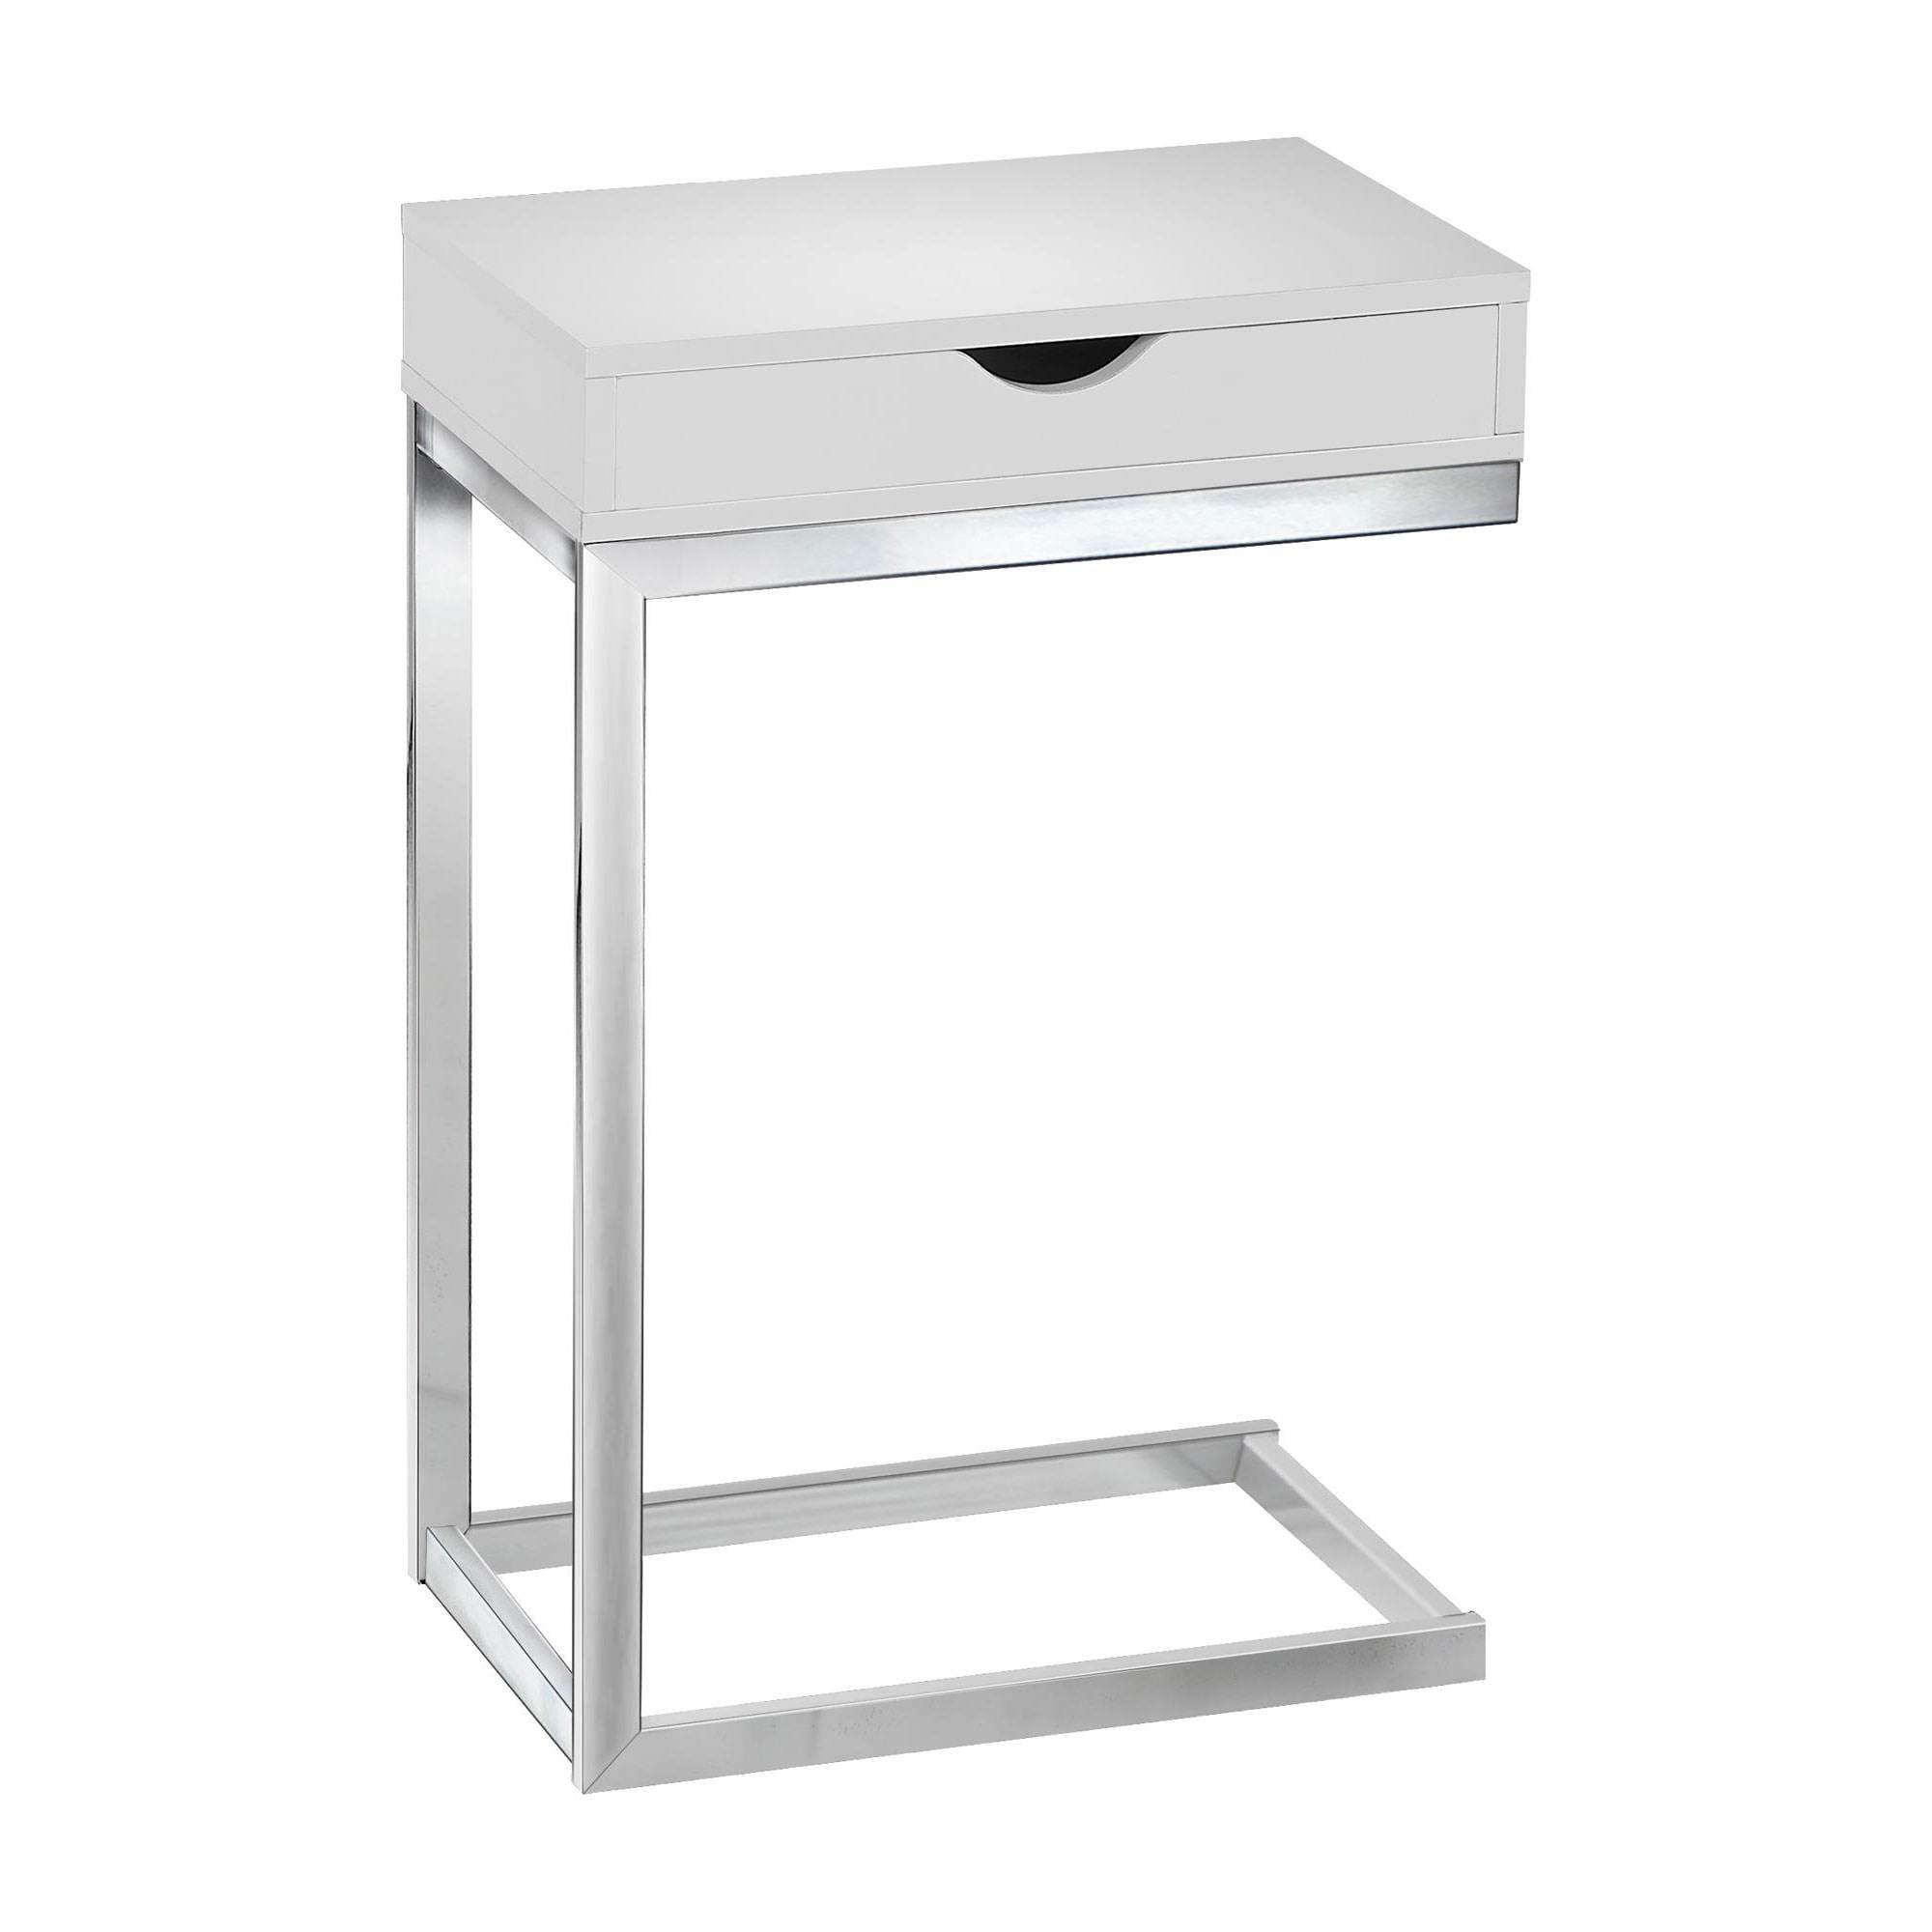 Glossy White Metal and Wood C-Shaped End Table with Drawer